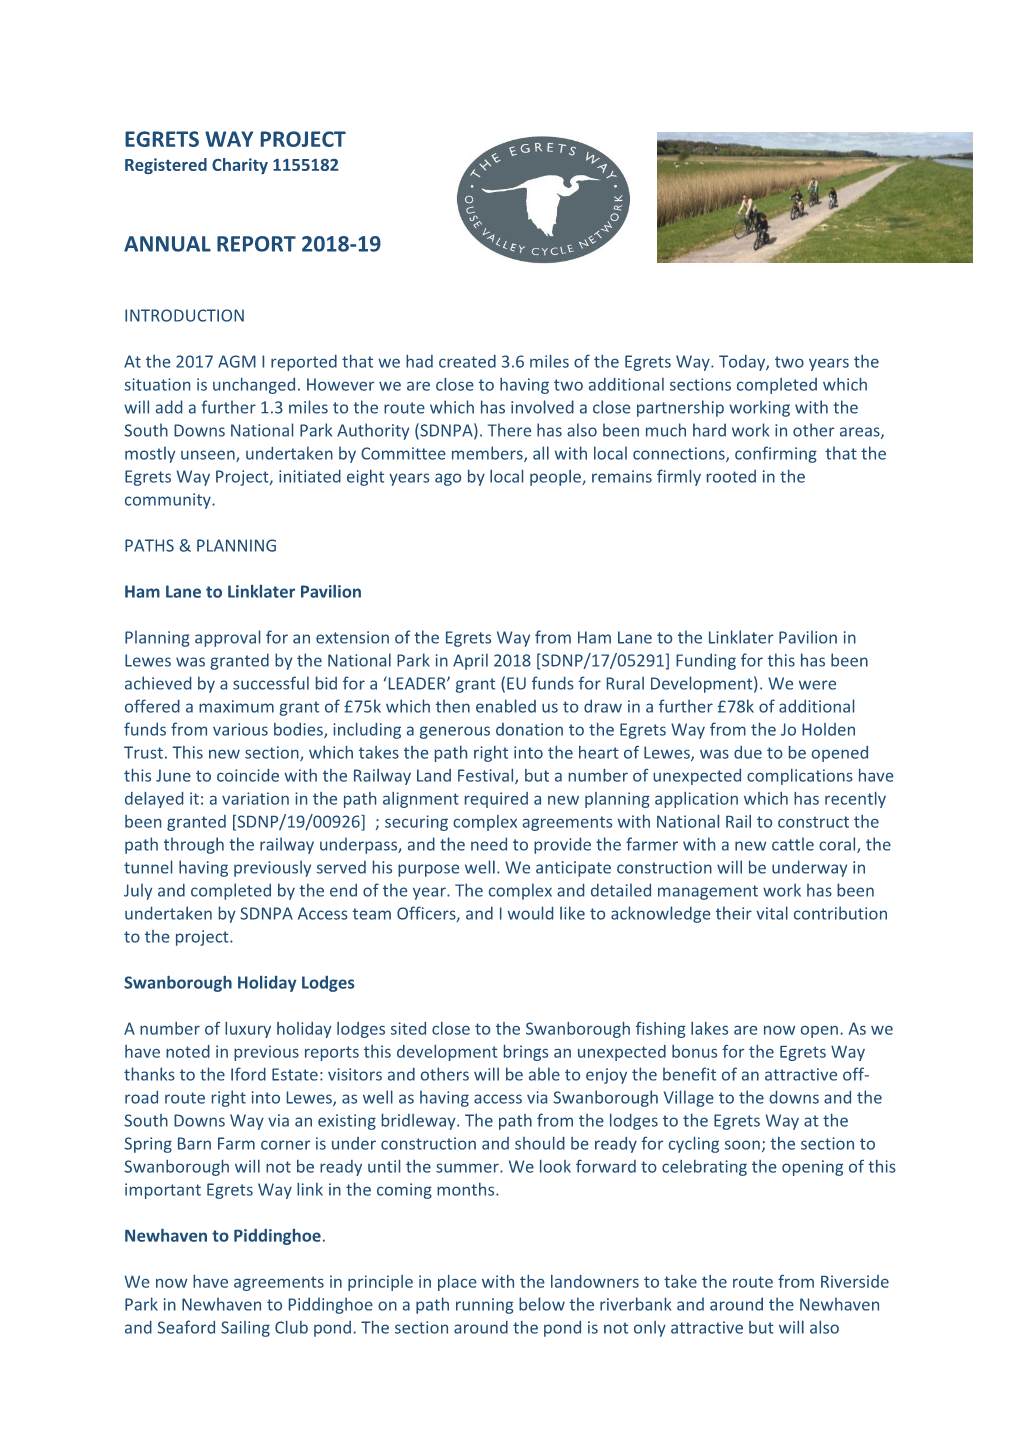 Egrets Way Project Annual Report 2018-19